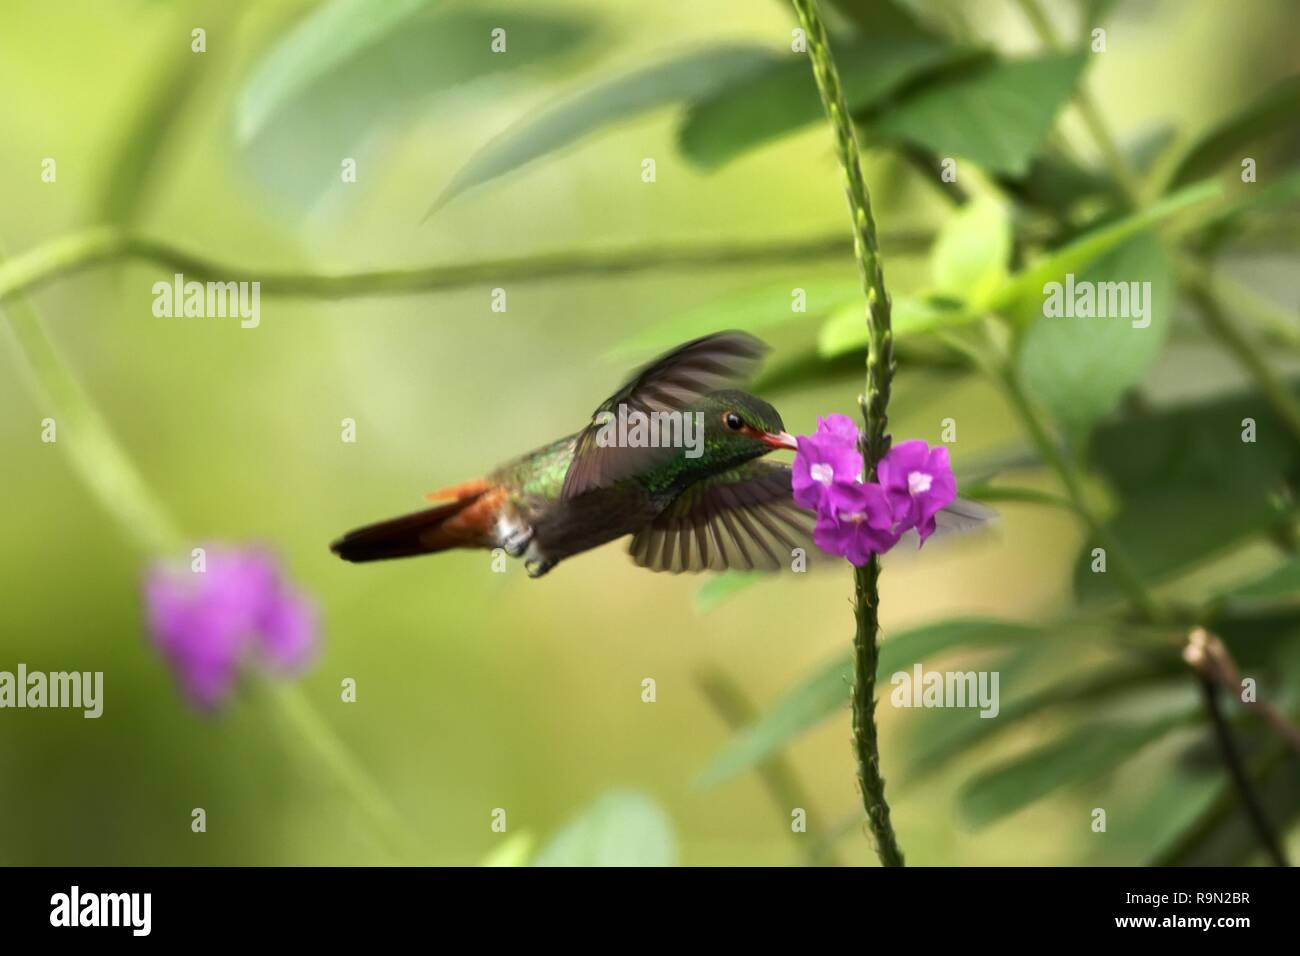 Rufous-tailed Hummingbird hovering next to violet flower in garden, bird from mountain tropical forest, Costa Rica, natural habitat, beautiful humming Stock Photo